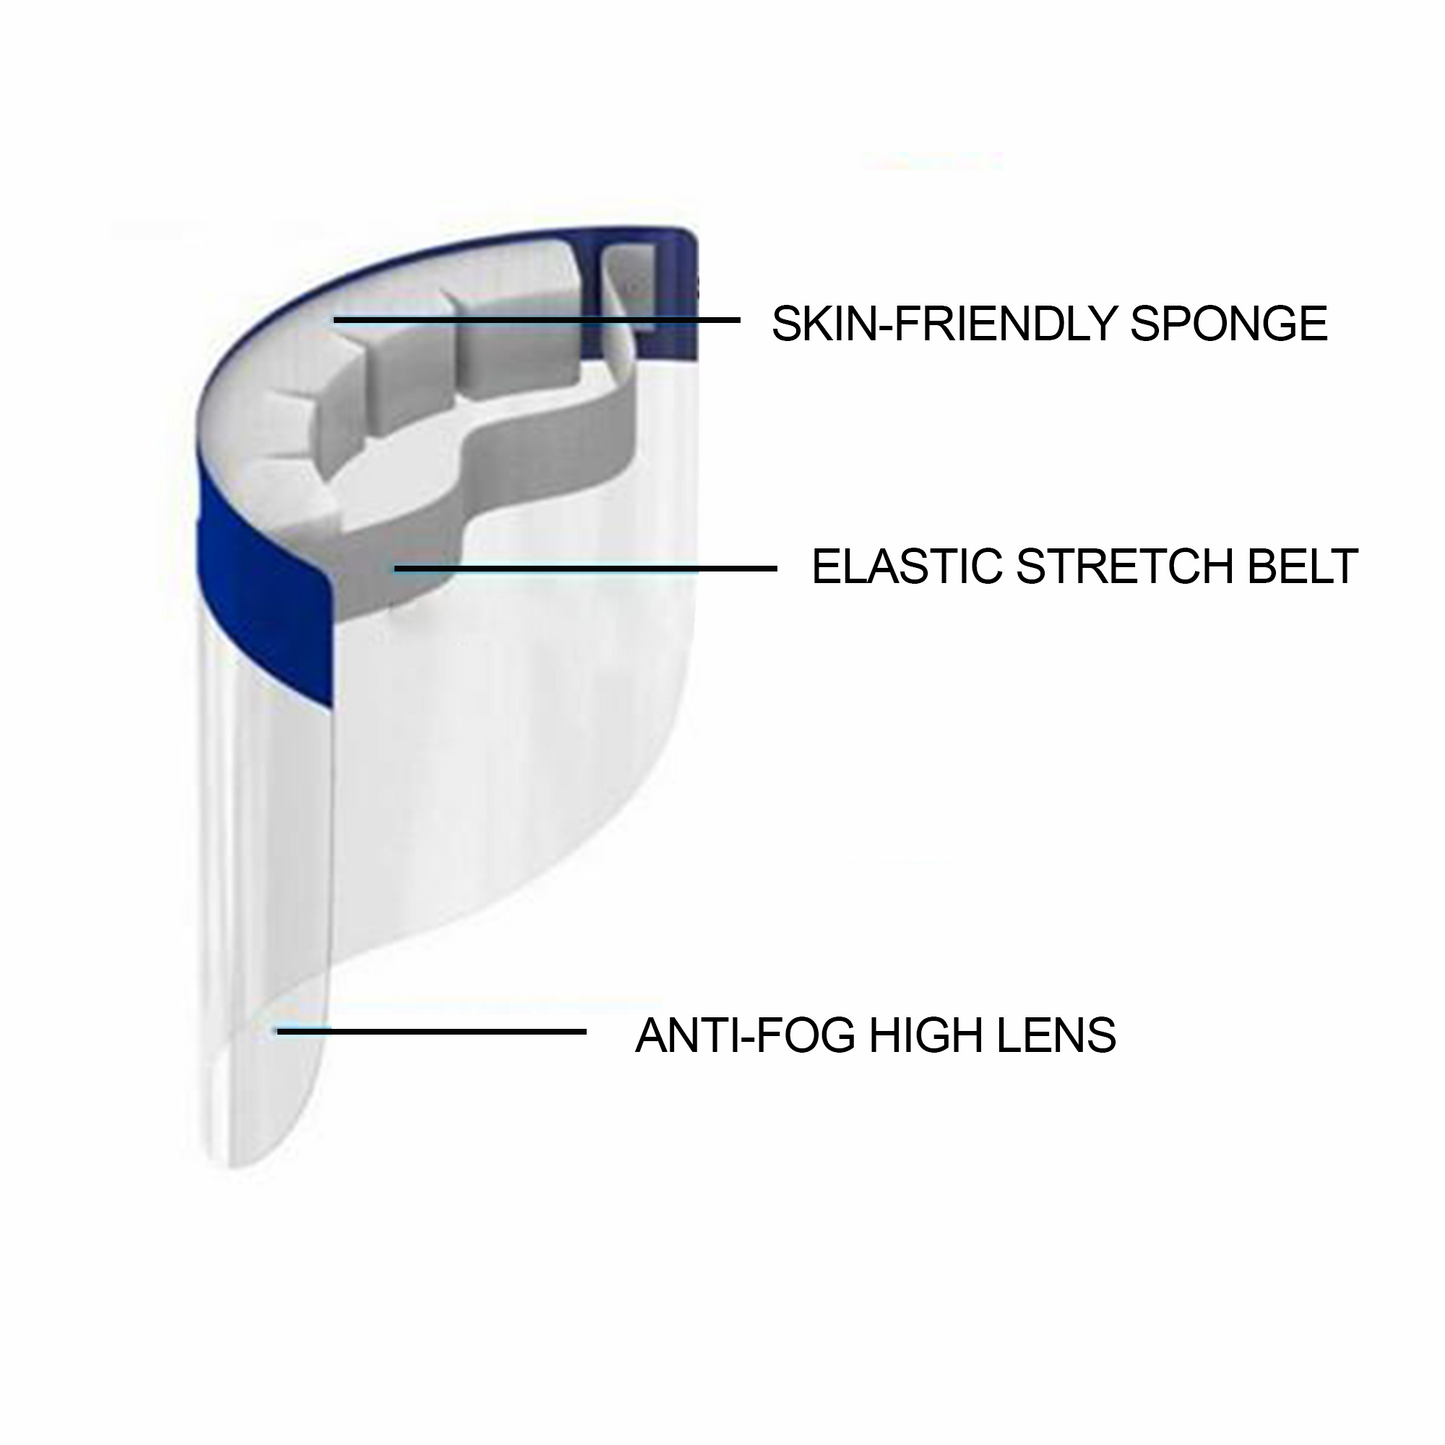 Protective Full-Face Shield with Elastic Straps